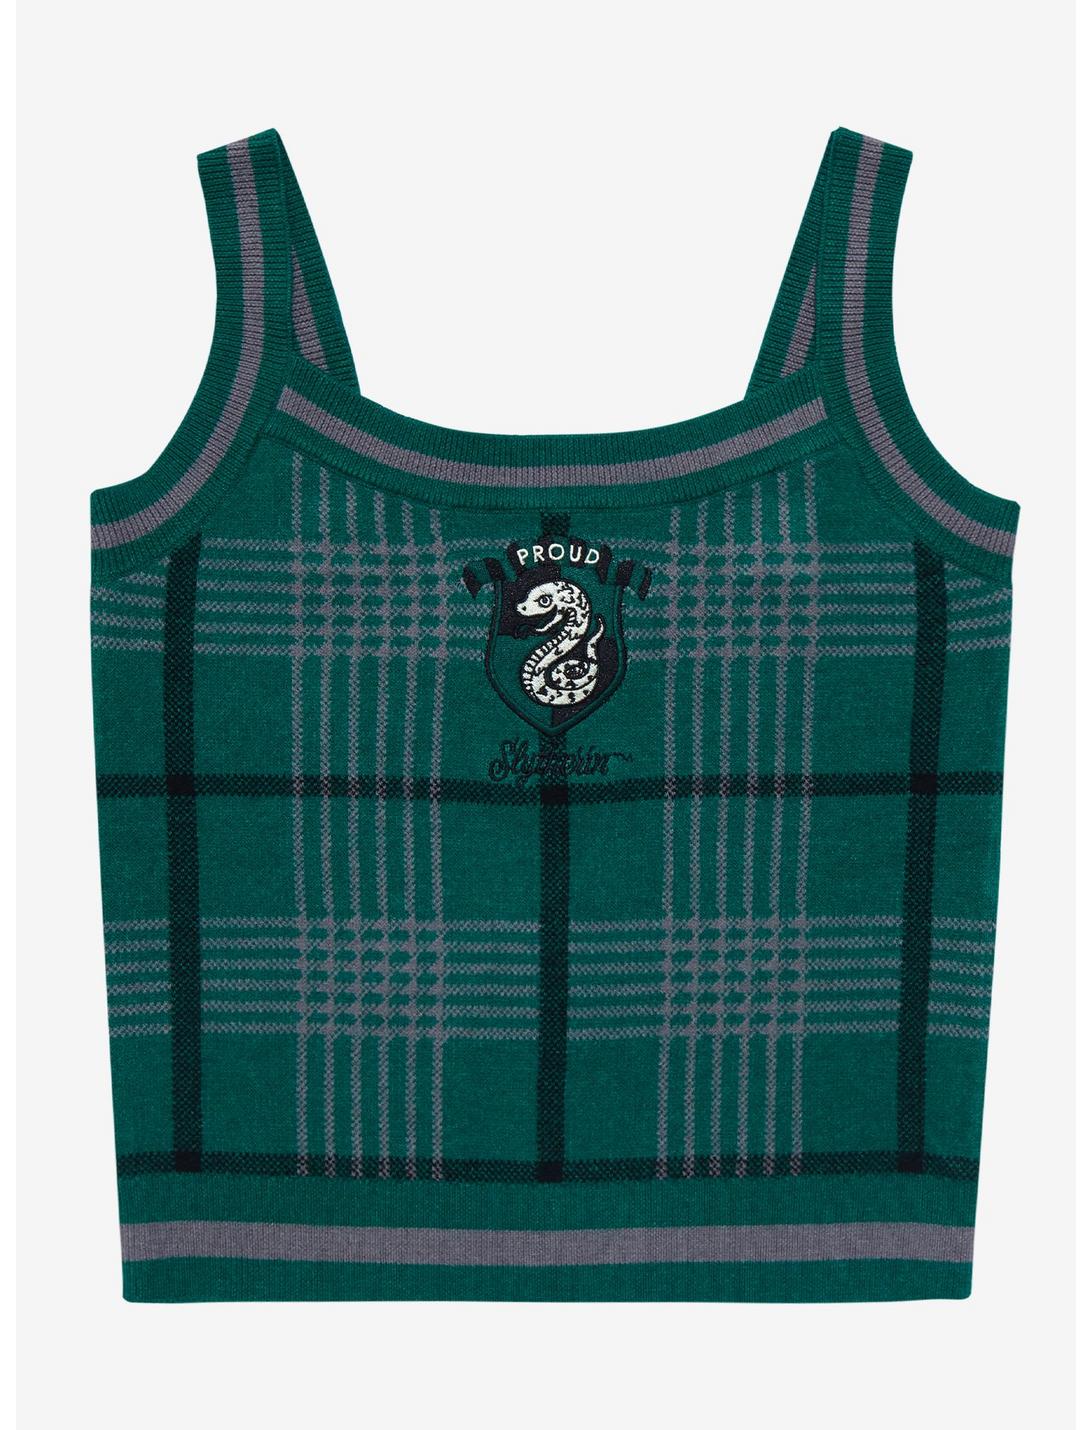 Harry Potter Slytherin Plaid Knit Tank Top - BoxLunch Exclusive, GREEN, hi-res